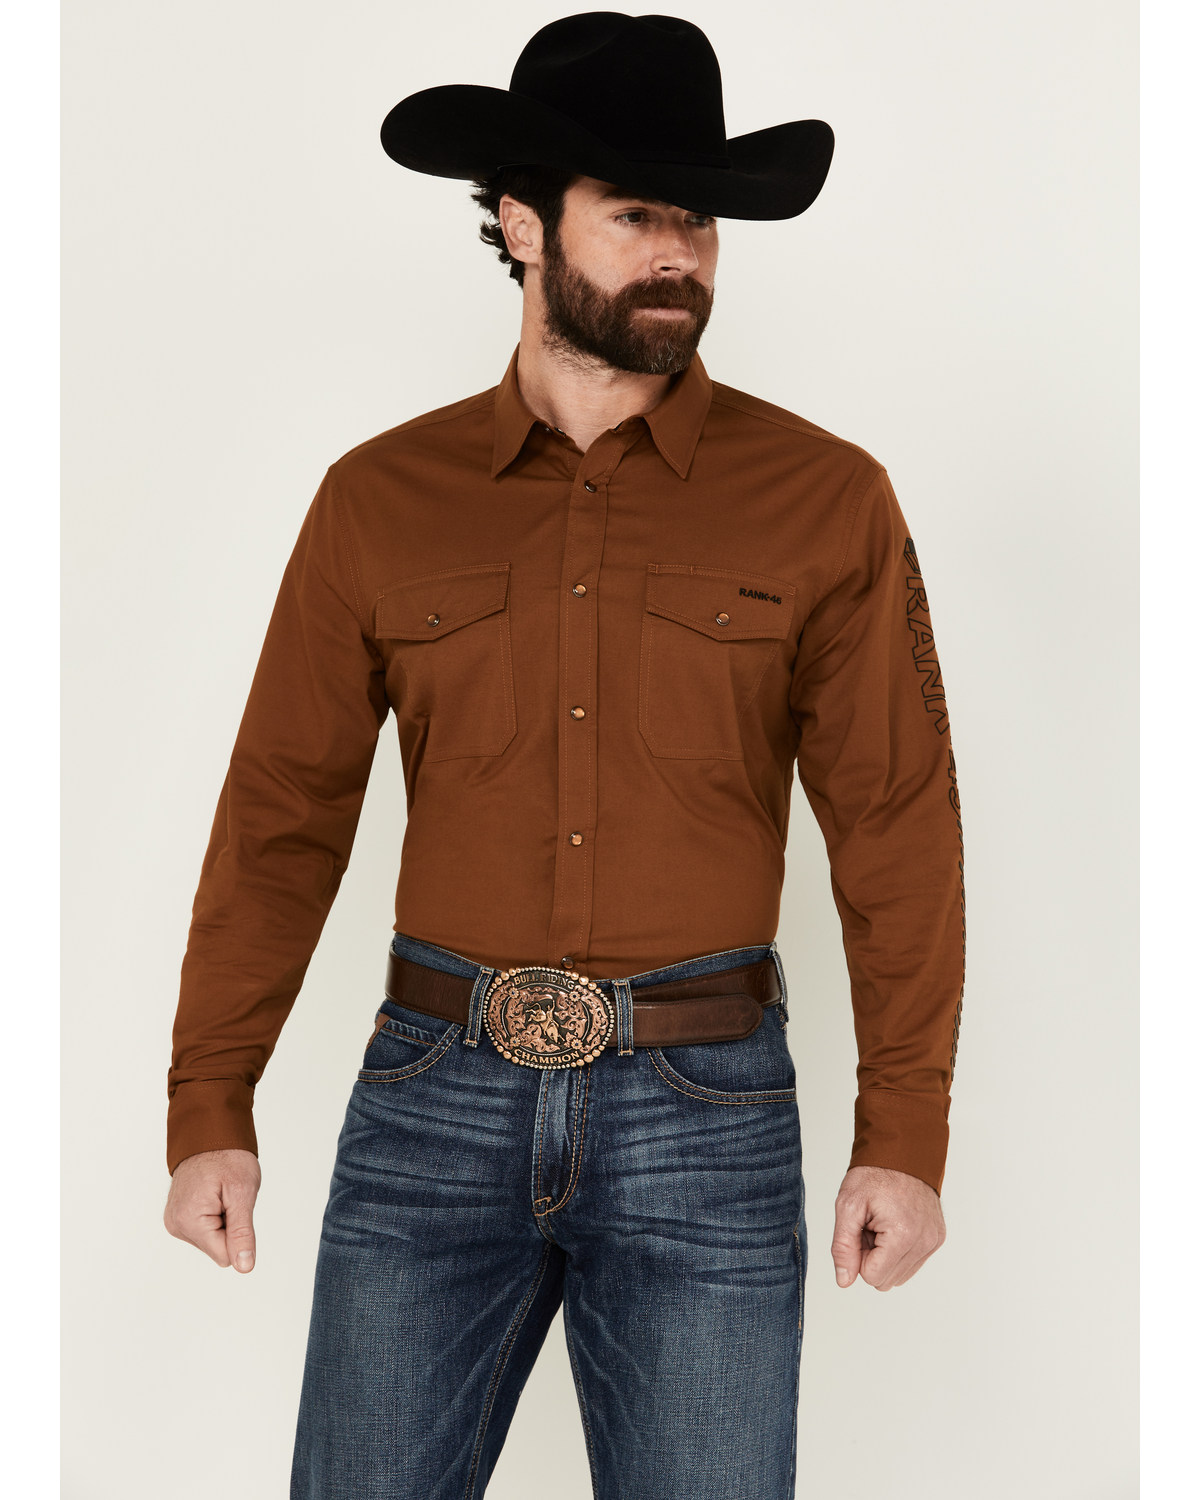 RANK 45® Men's South West Action Twill Long Sleeve Snap Performance Western Shirt